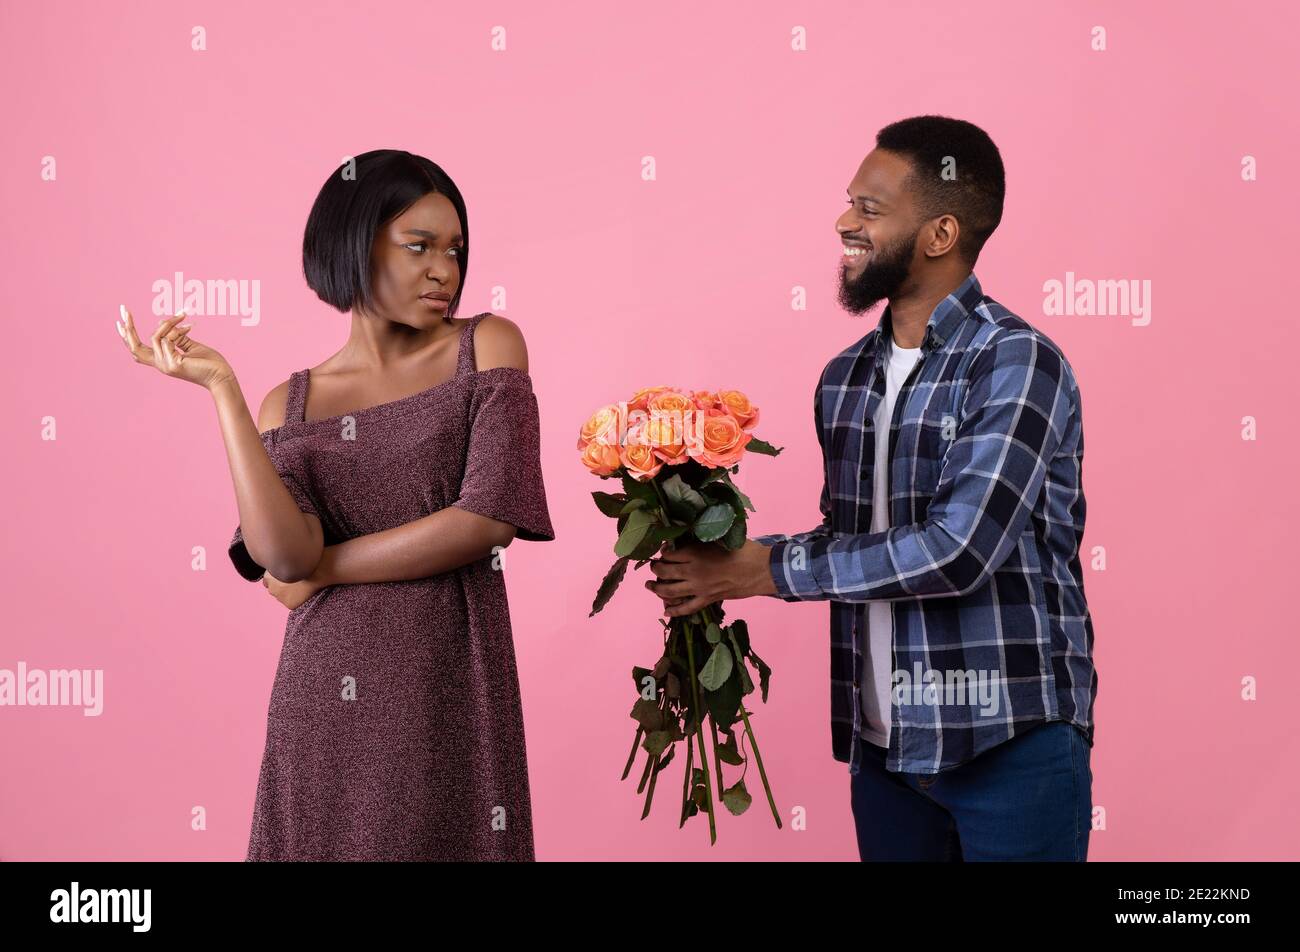 Irritated black woman rejecting geek man offering flowers on Valentine's Day over pink studio background Stock Photo